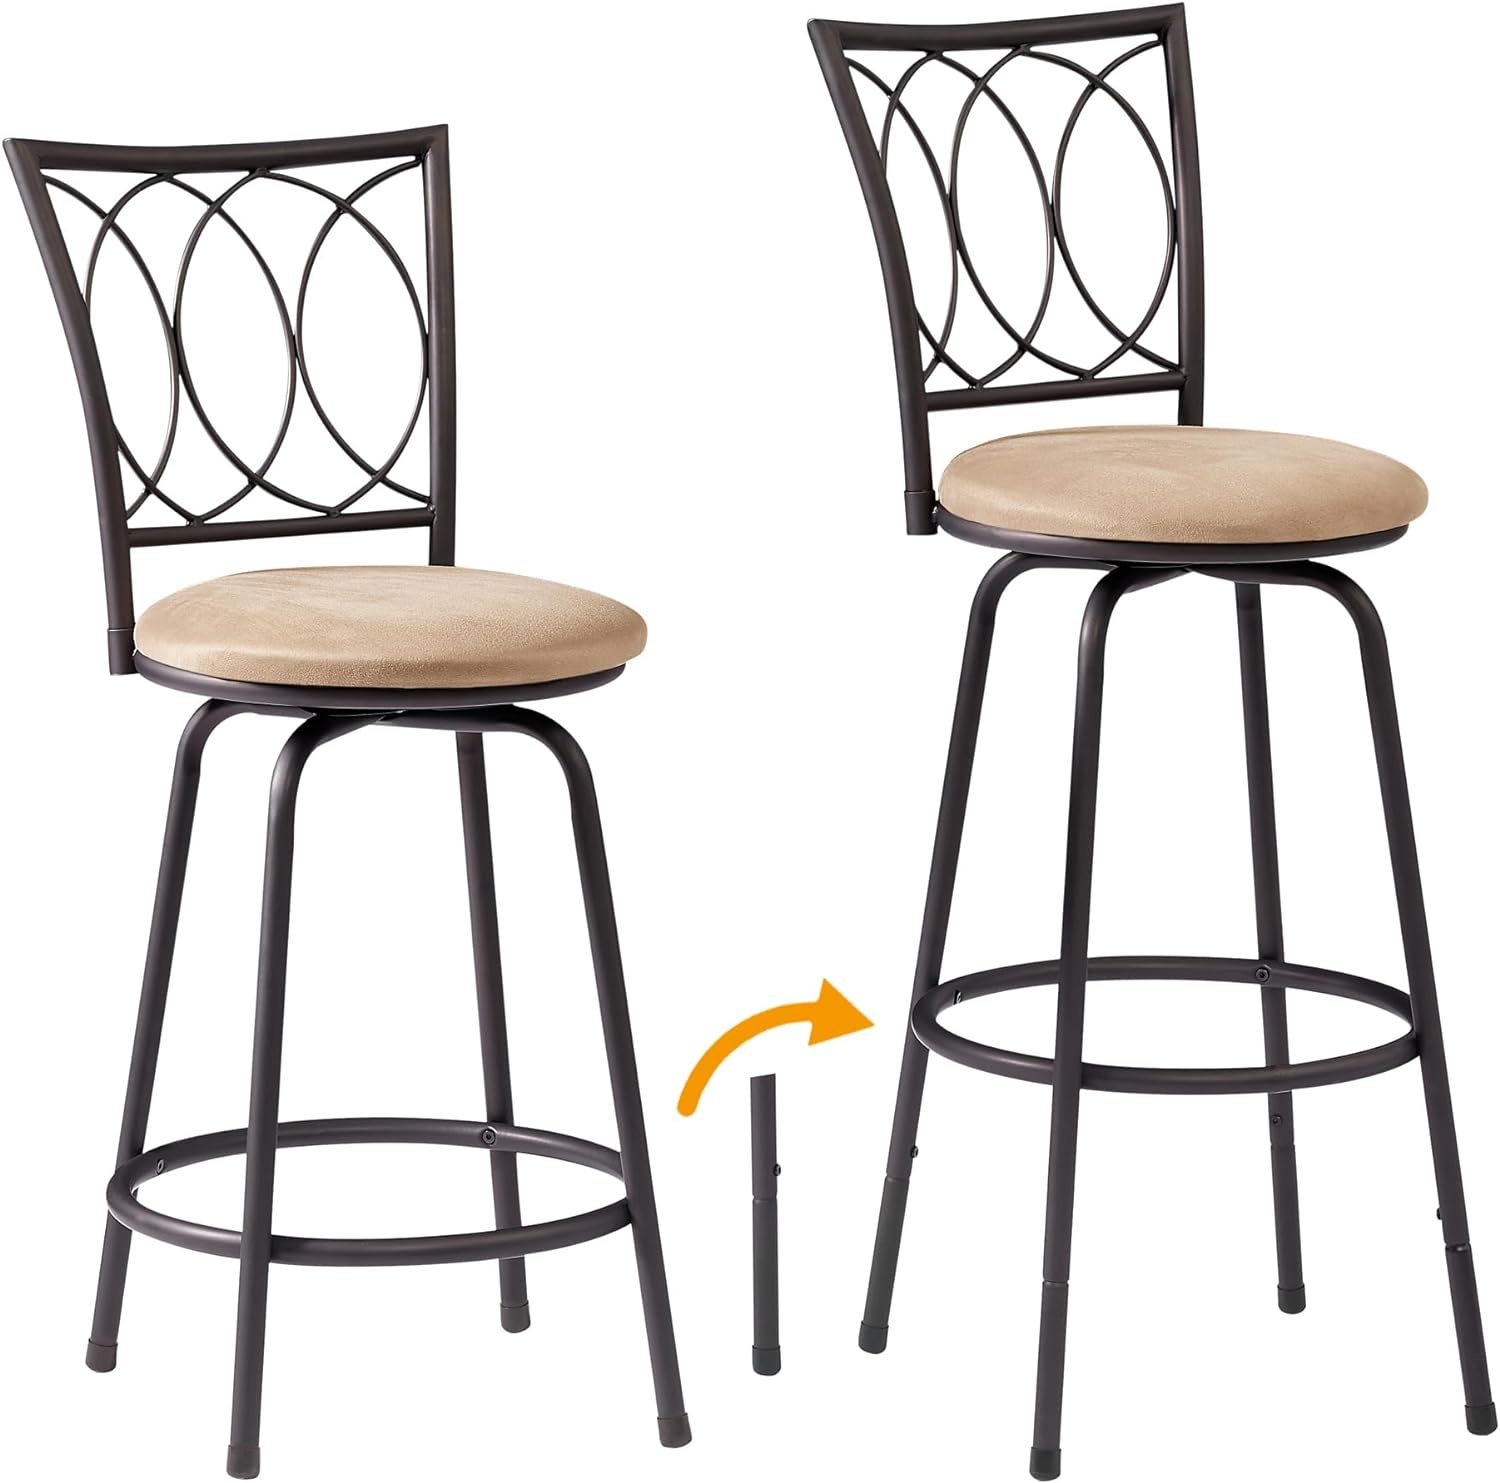 VECELO Barstools with 360 Degree Swivel Seat Top, Adjustable Counter Stools, Steel Bistro Pub Chairs